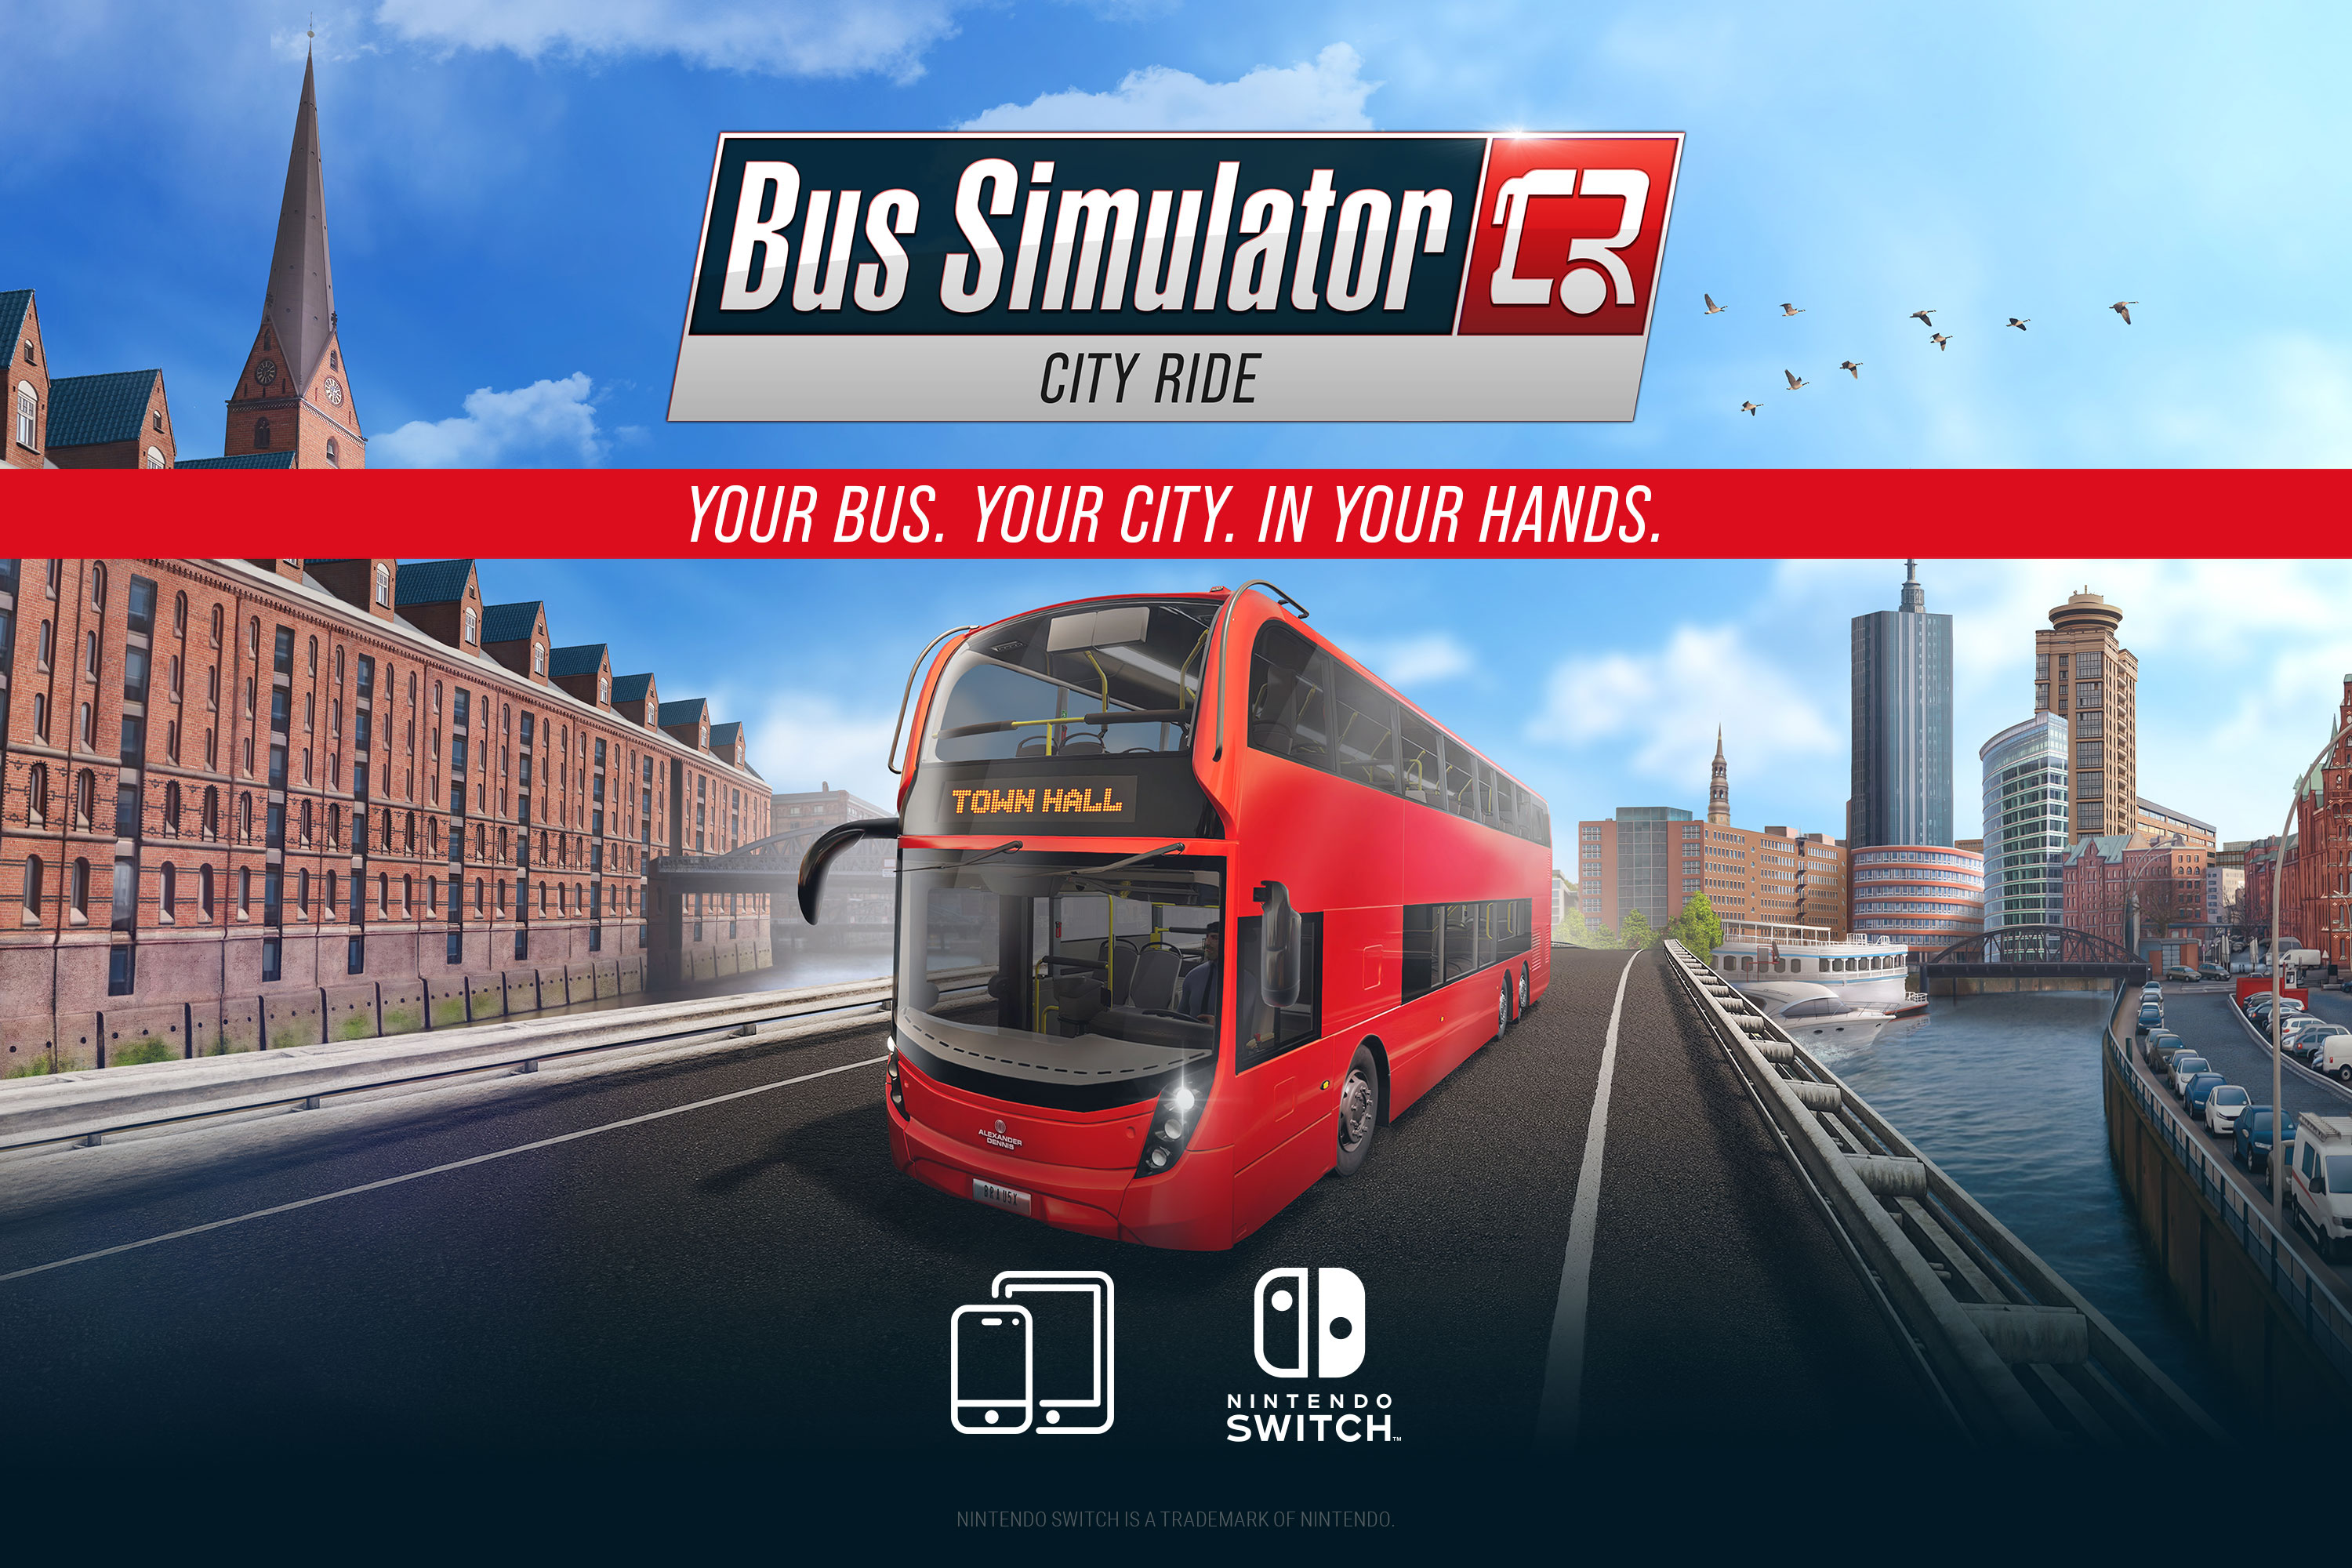 Bus Simulator City Ride Your Bus. Your City. In your Hands.